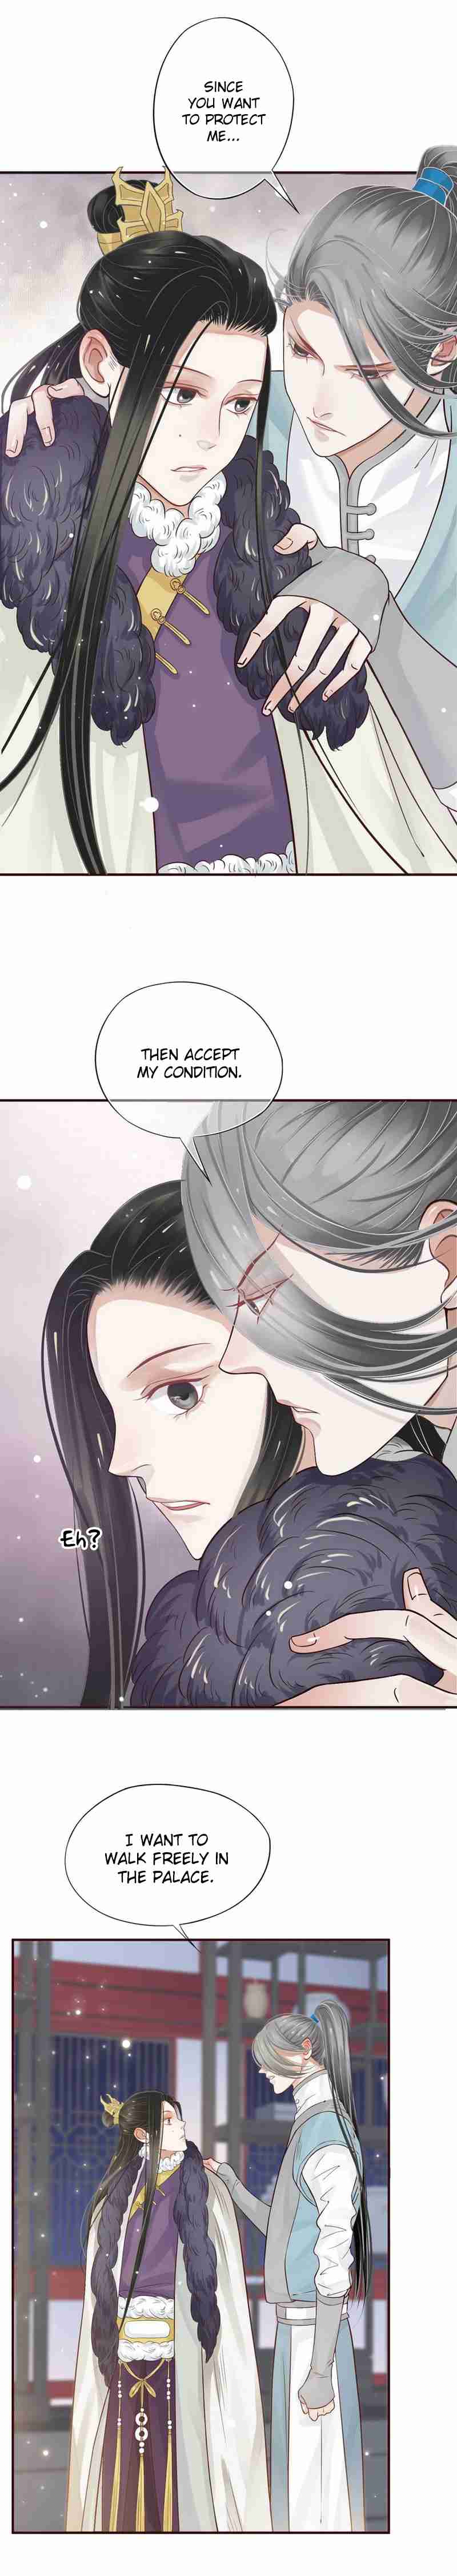 To Be Or Not To Be Ch. 11 The emperor's Request?